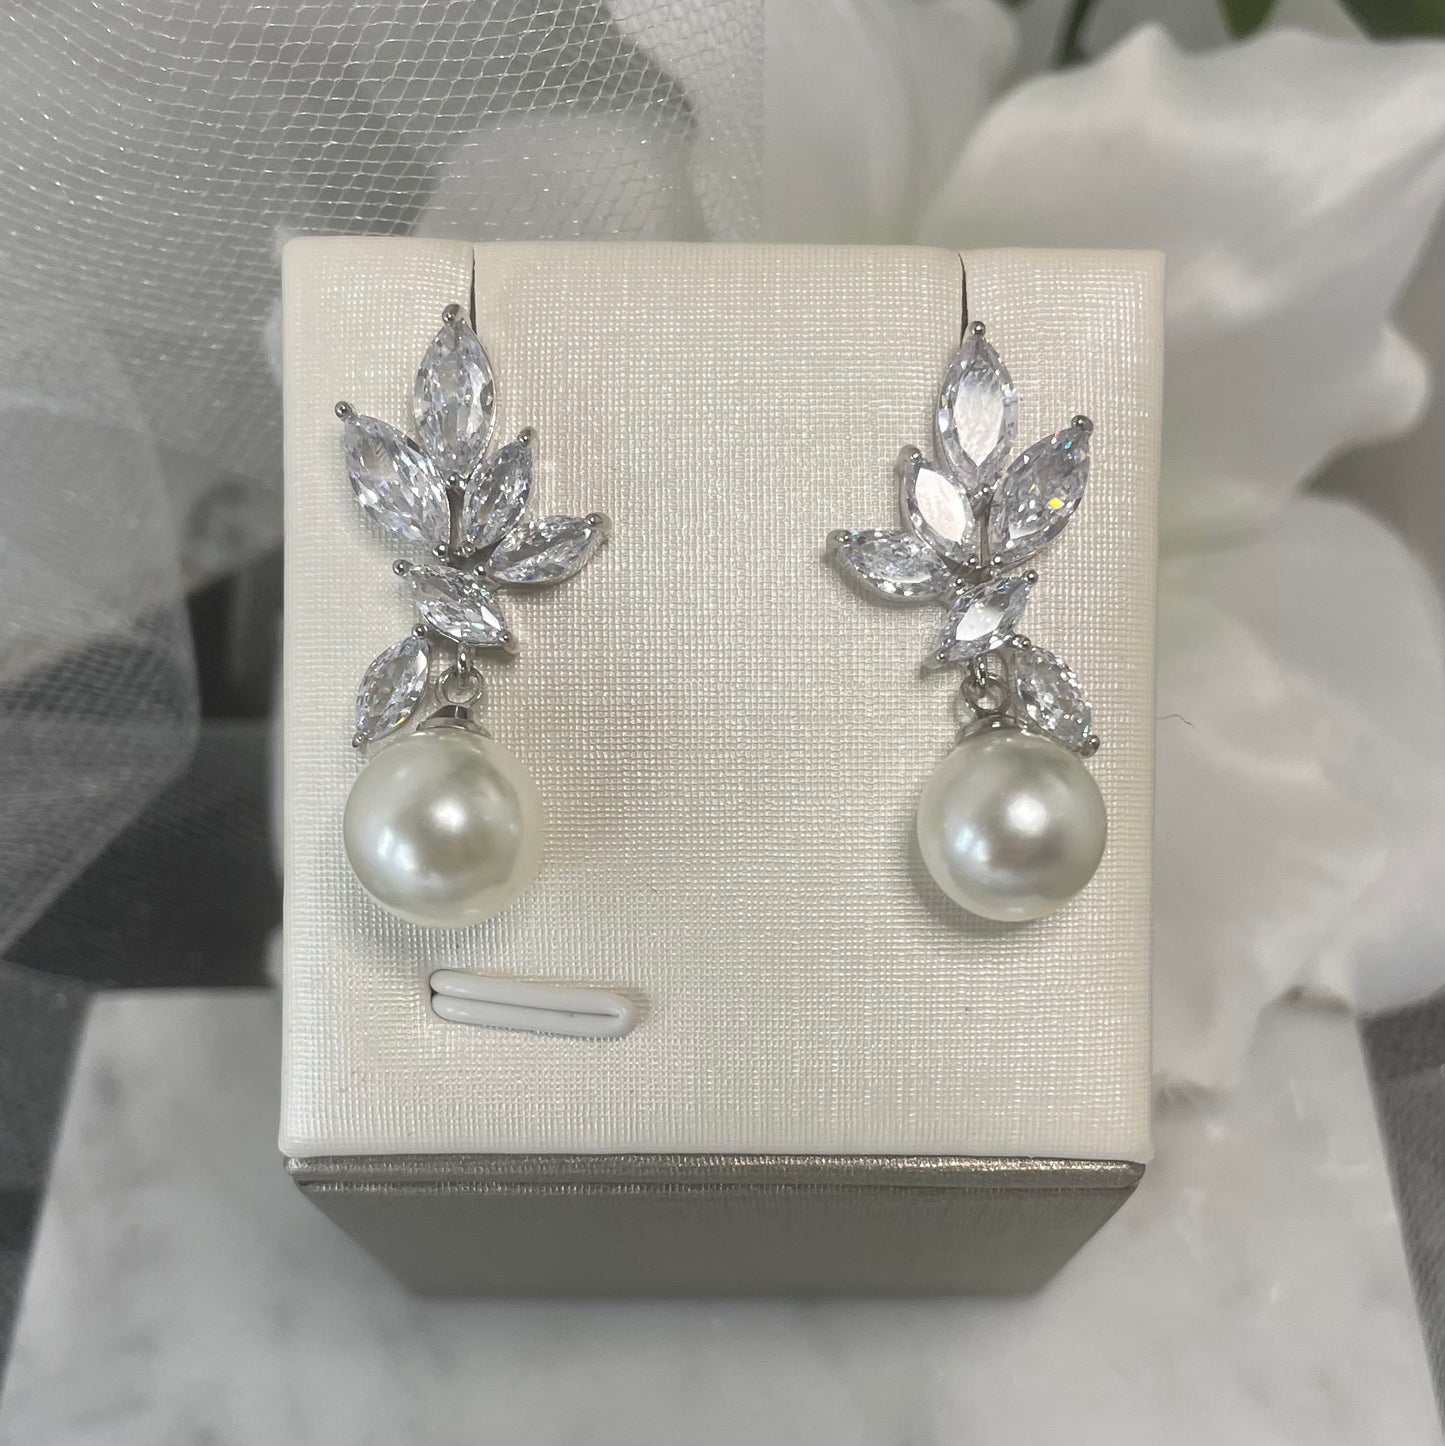 Celeste earrings with cascading leaf-like crystals and a central pearl in rose gold & silver.